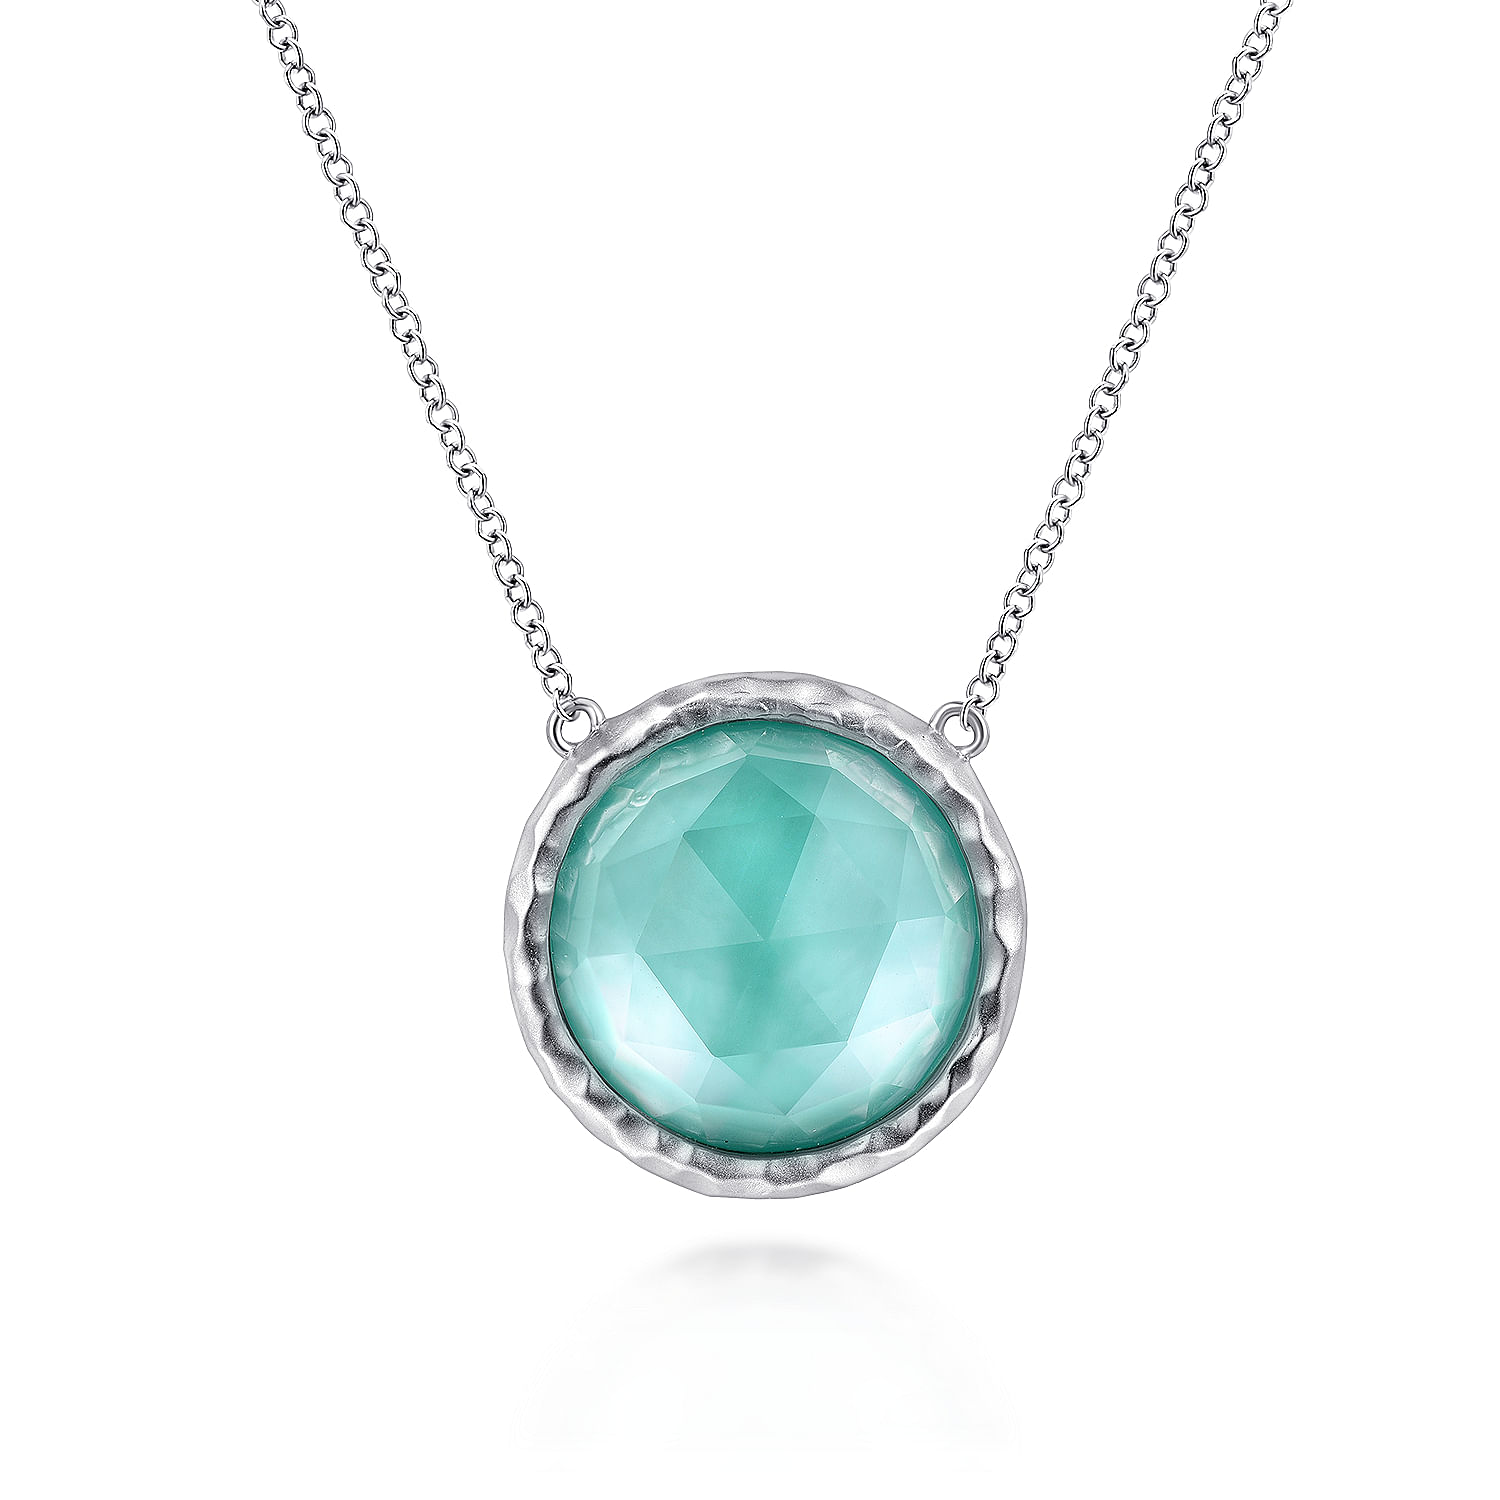 925 Sterling Silver Round Rock Crystal/White MOP and Green Onyx Doublet Pendant Necklace